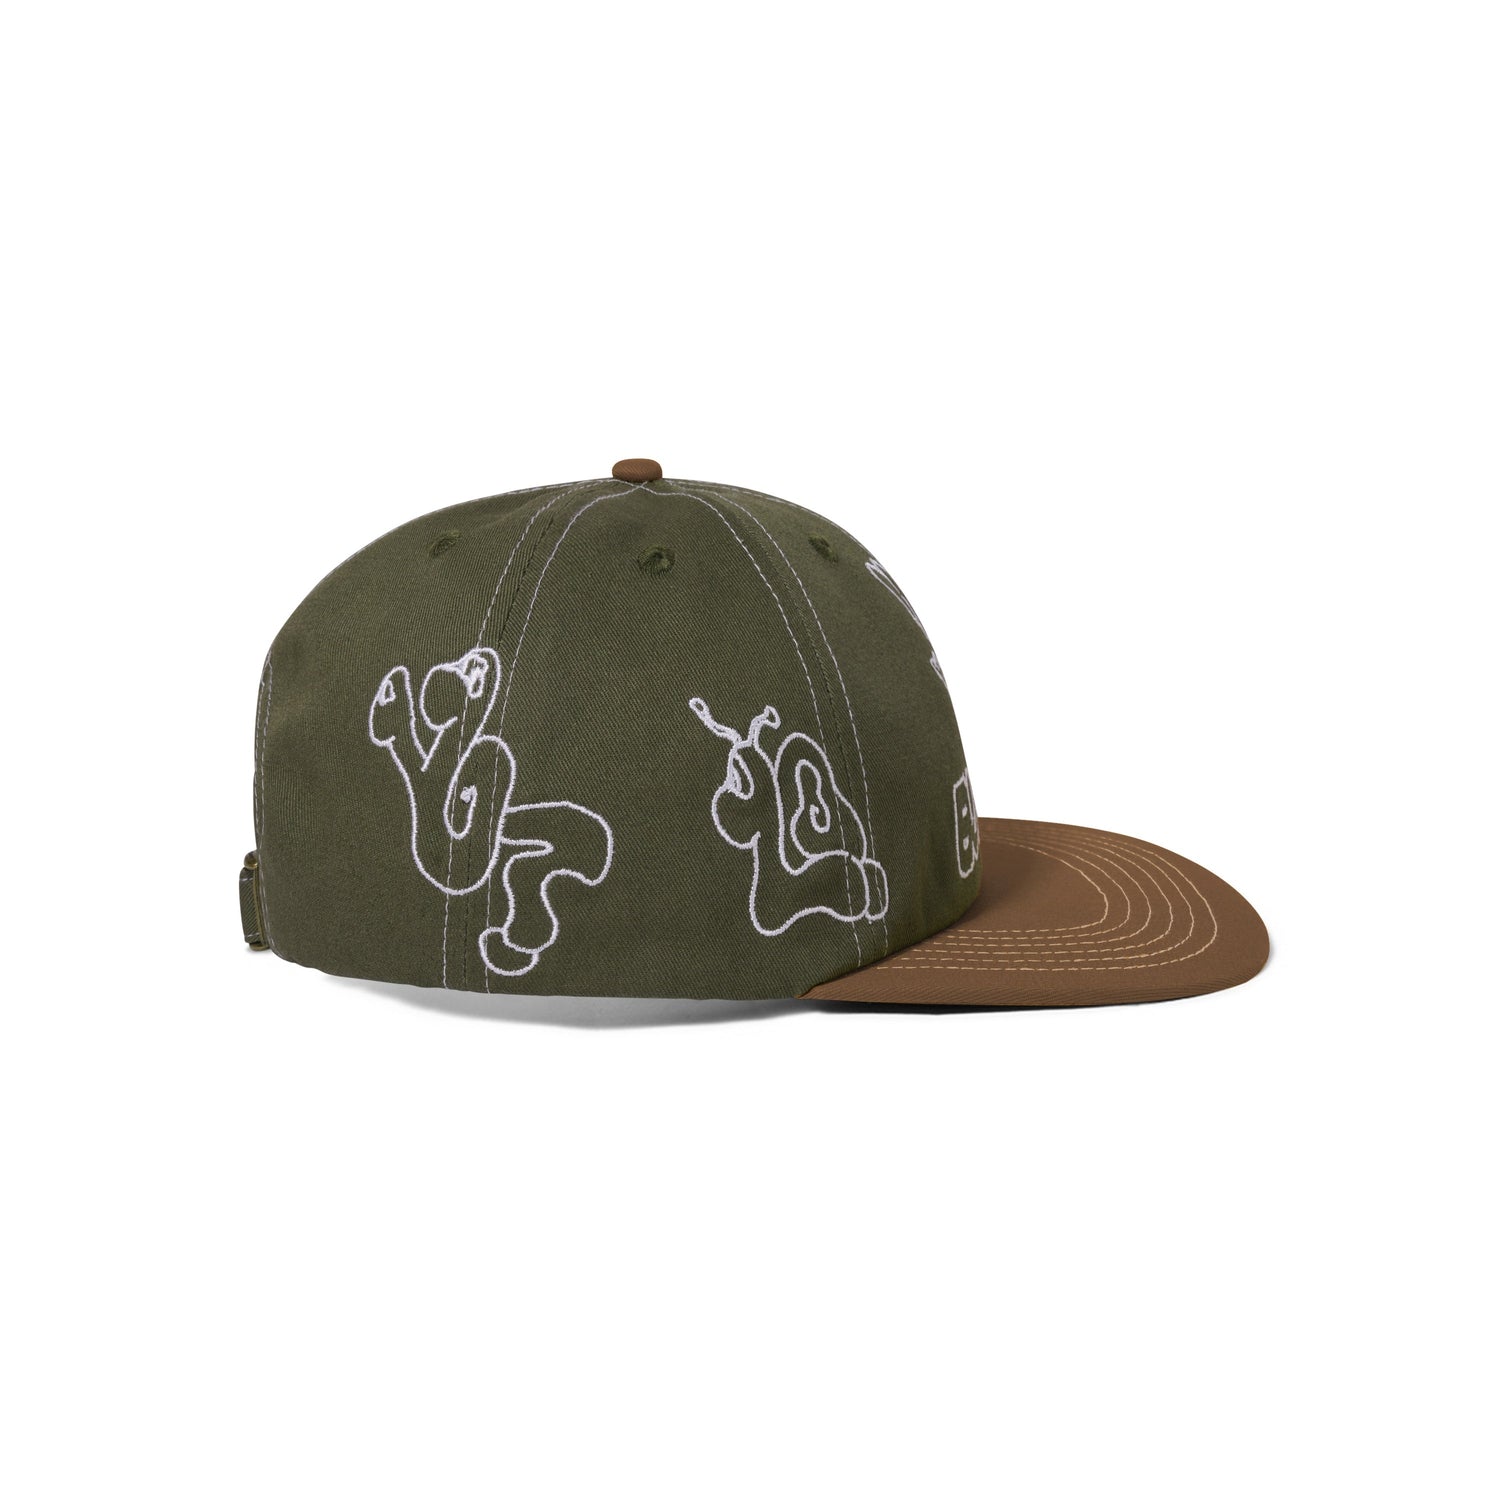 Critter 6 Panel Cap, Army / Brown